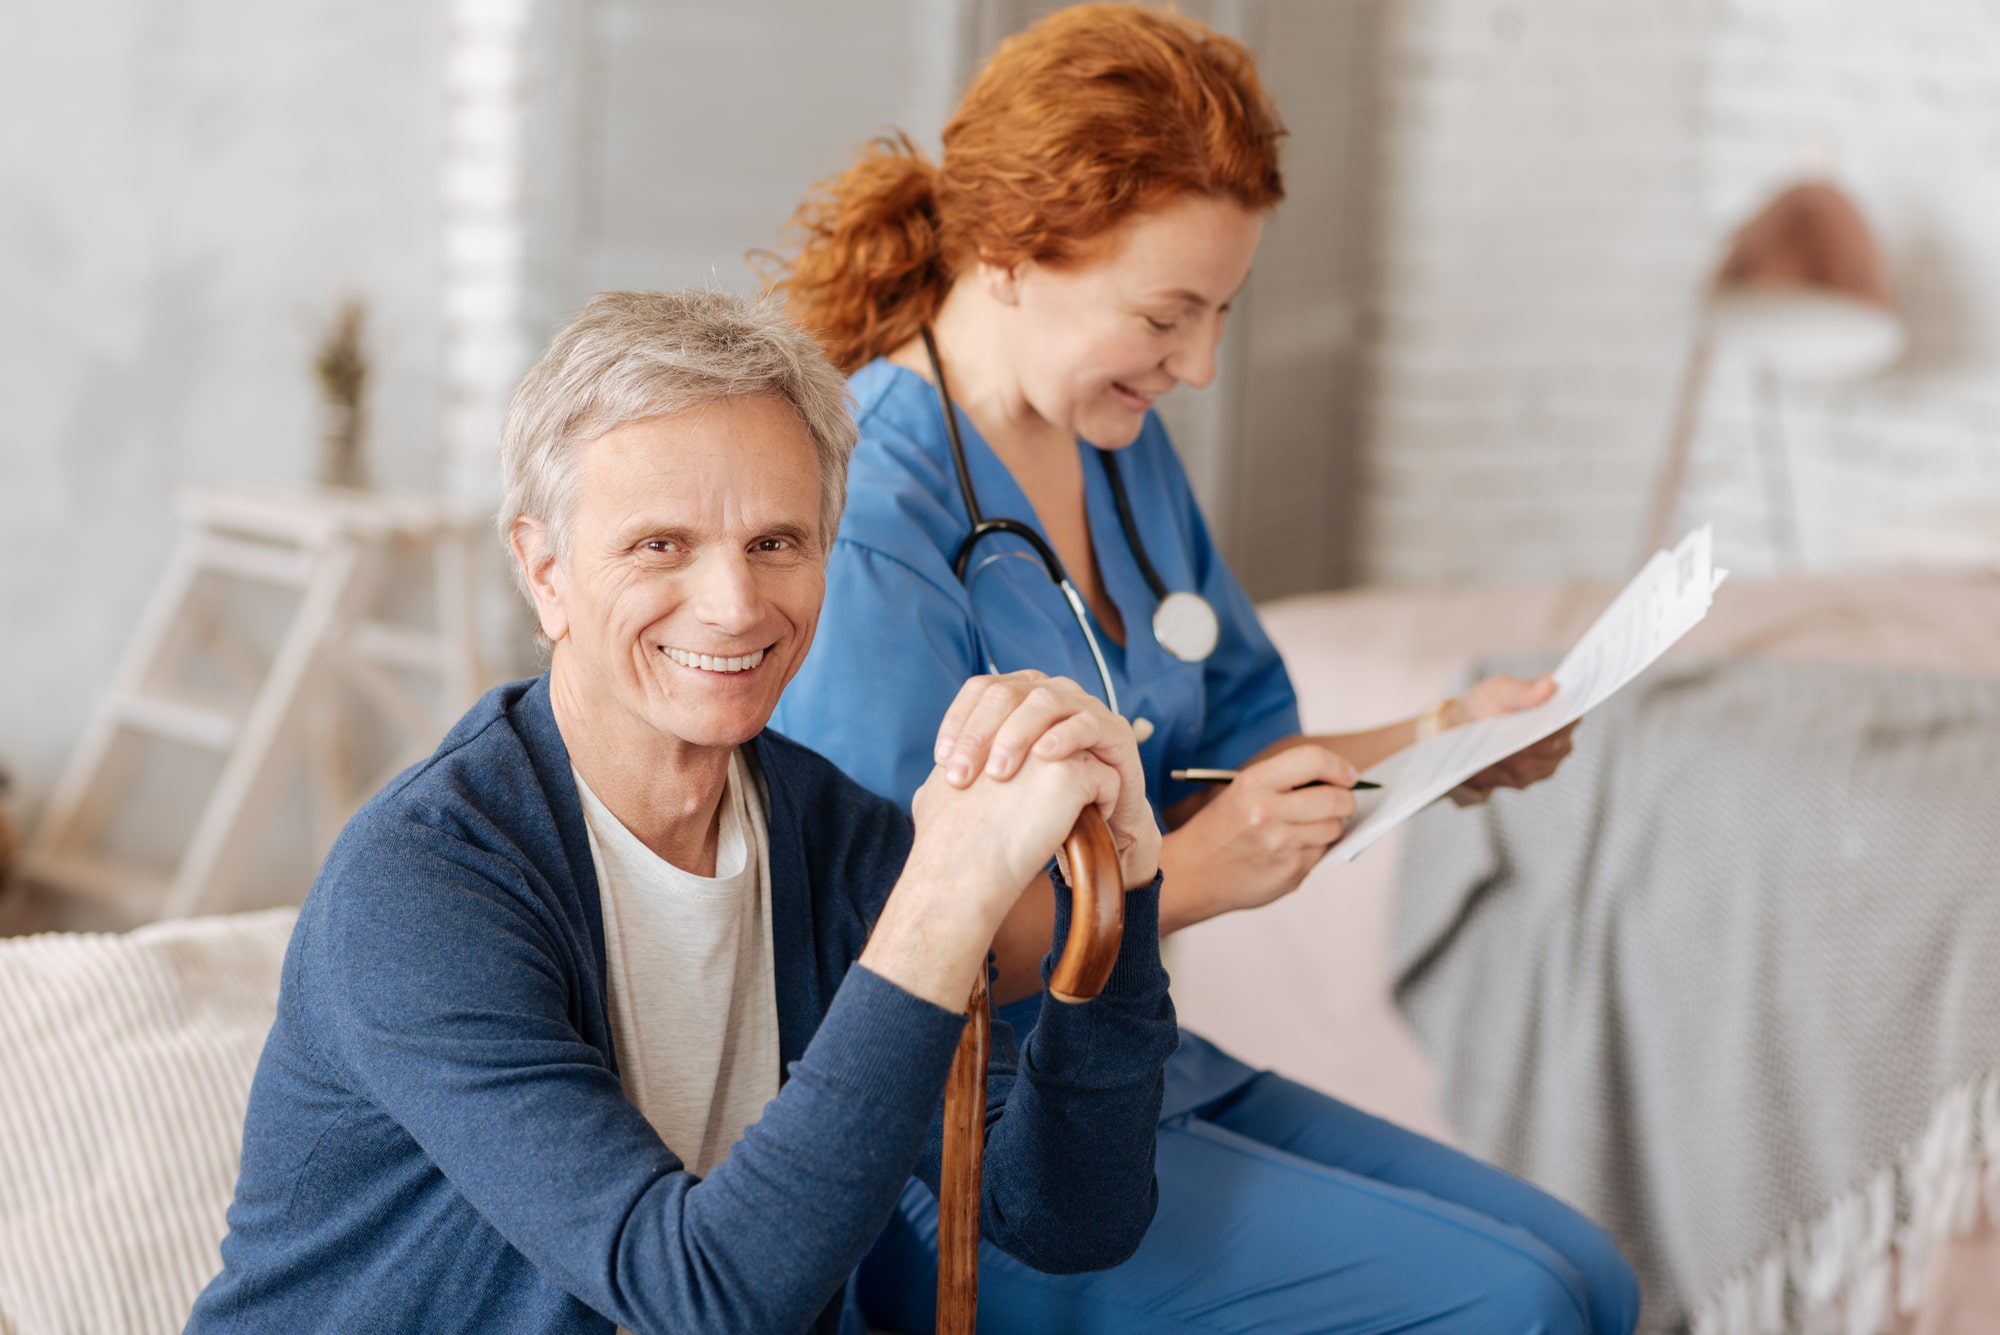 Image of a smiling senior man with a cane sitting while a medical professional takes a needs assessment.